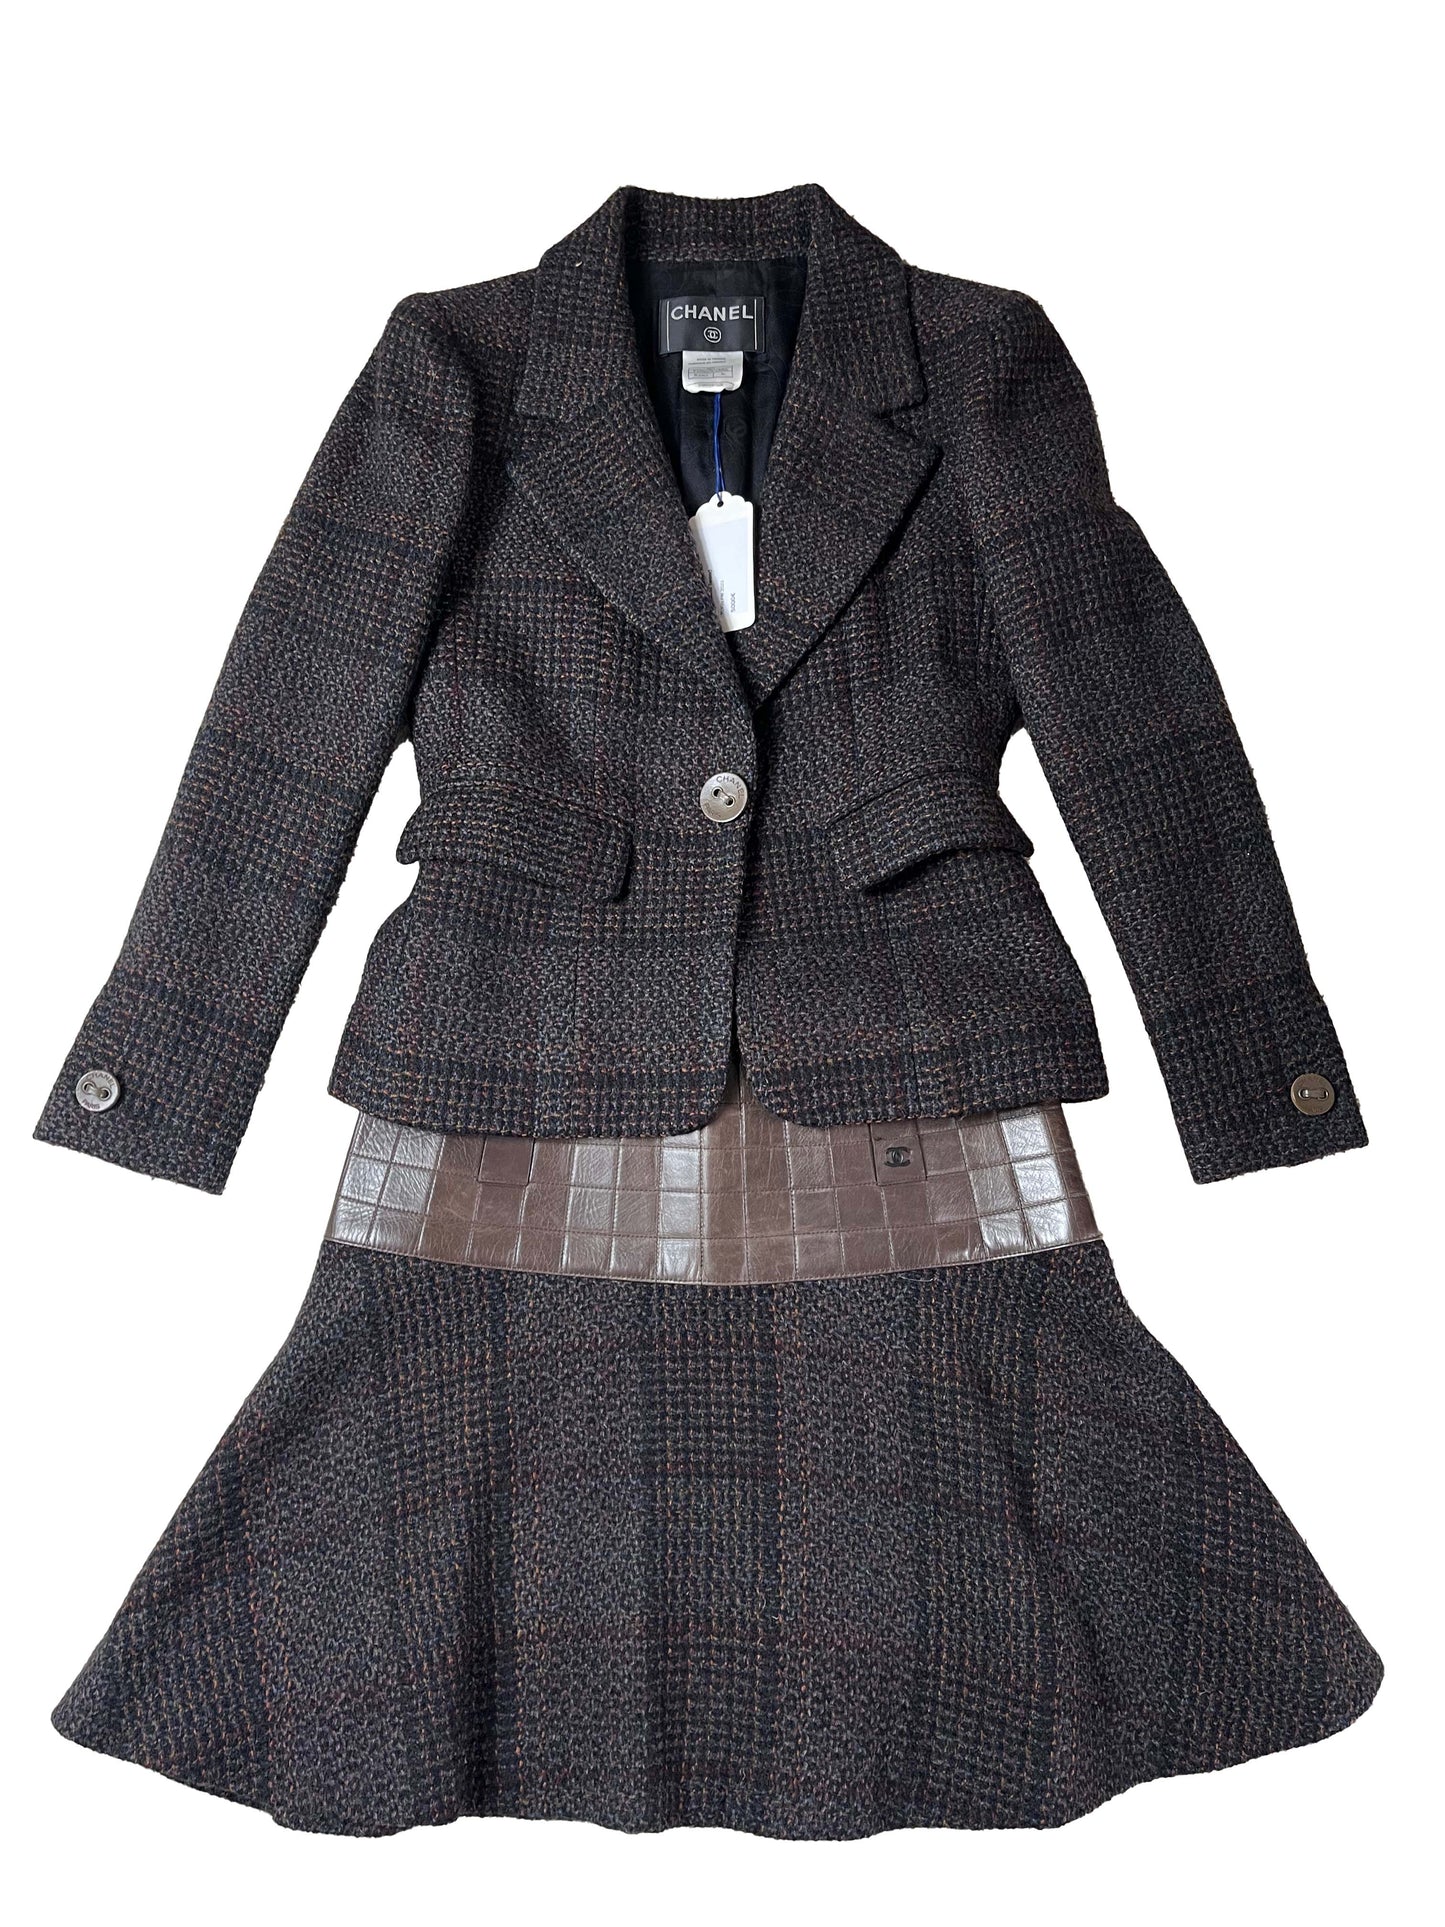 Chanel 1999 blazer and skirt - the classic tailleur jupe. The entire twinset is in tweed and lined with silk. Chanel Archive.